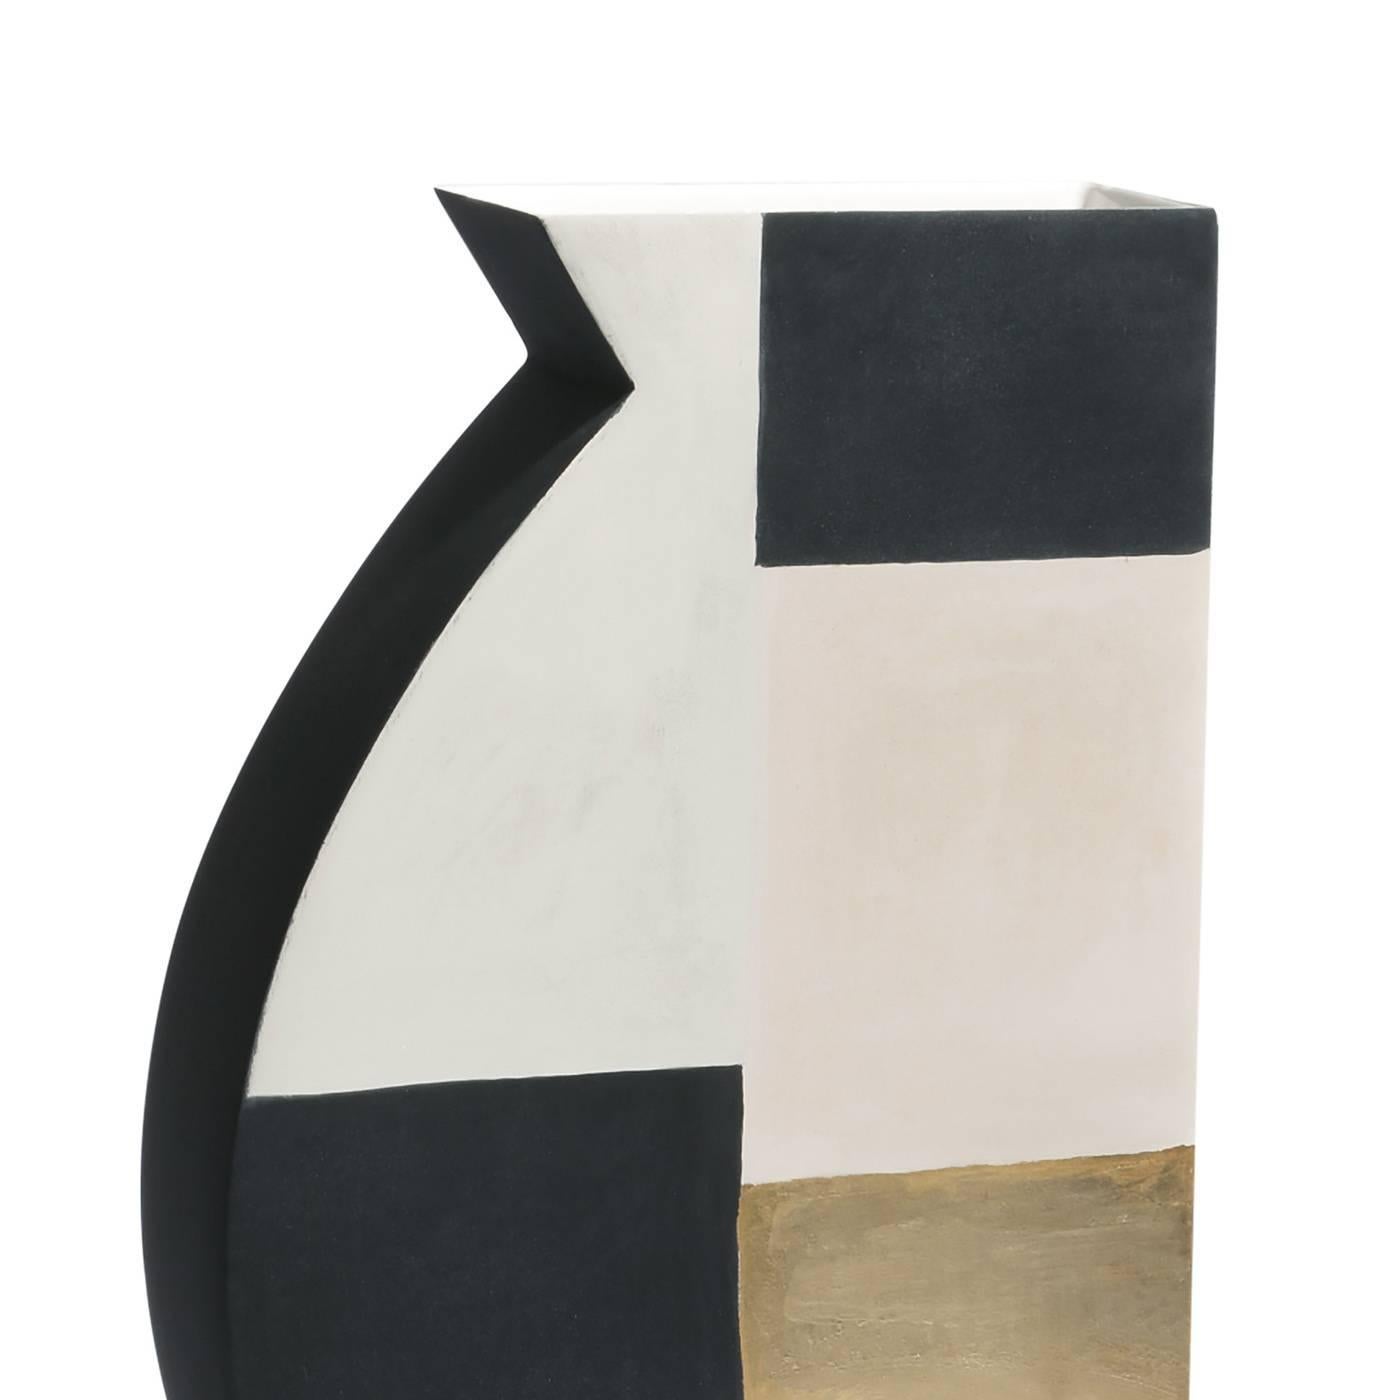 This exquisite vase is part of the Pacay series and features a narrow body, decorated on the side with black paint that enhances the two-dimensional illusion. The front and back panels, with their sinuous profile, are adorned with an abstract